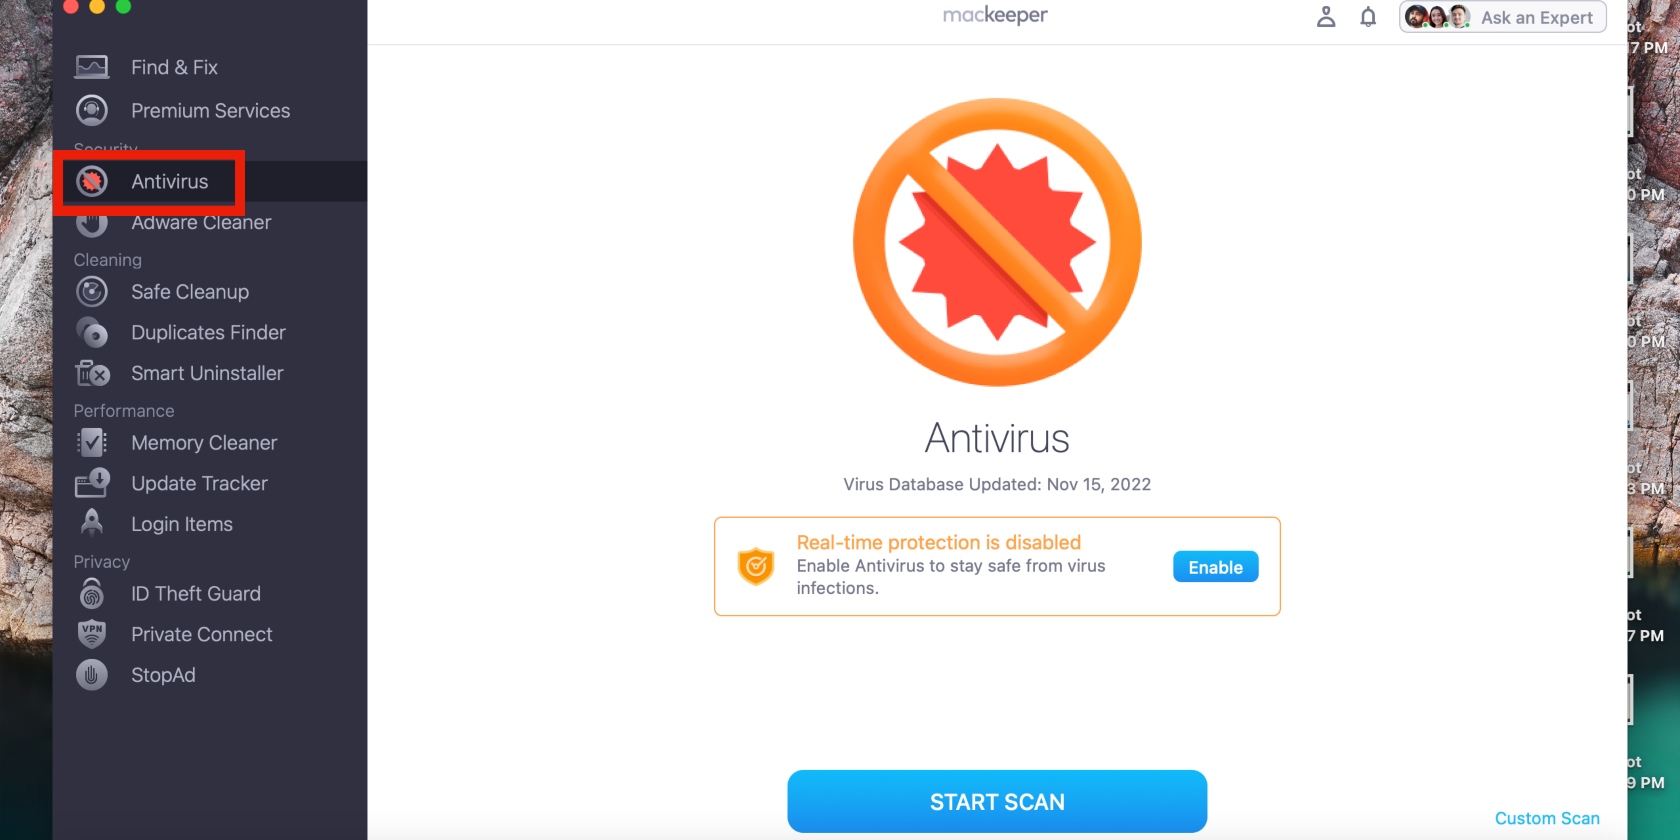 You can use antivirus software to delete the Automator virus from your Mac automatically.  To do it with MacKeeper, open the app and click on Antivirus in the sidebar. Enable real-time protection and hit the Start Scan button.